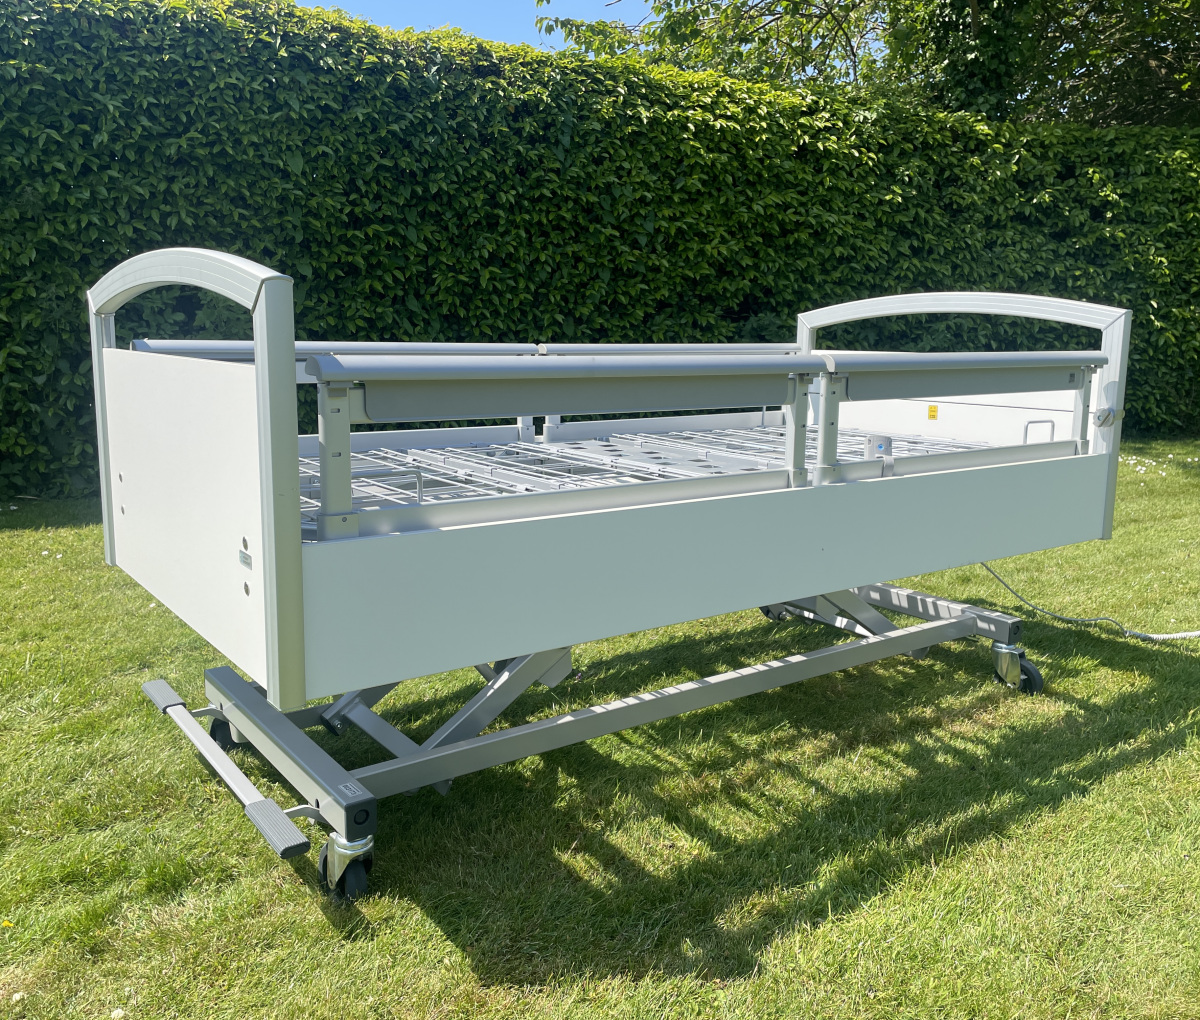 1 - Surplus hospital bed ready for reuse main